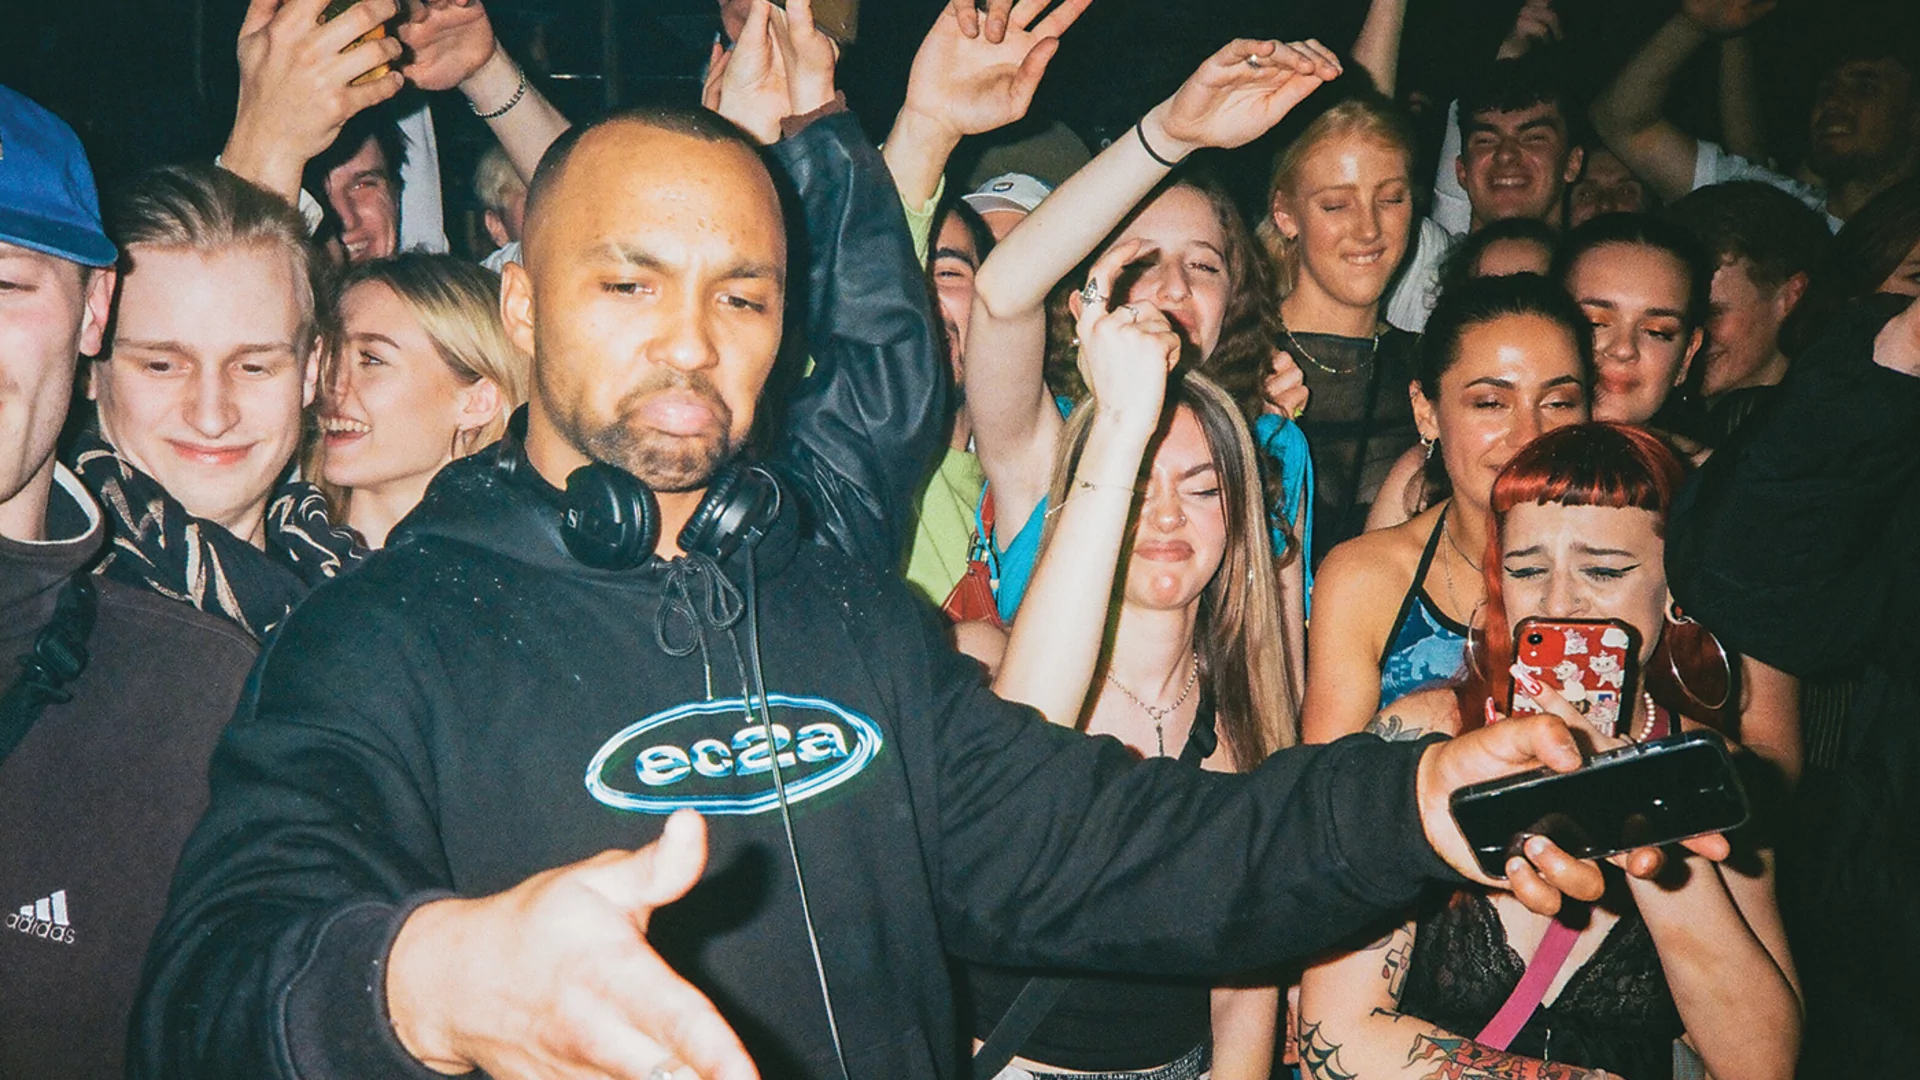 Dr Dubplate DJing in an ec2a hoody surrounded by a crowd of ravers